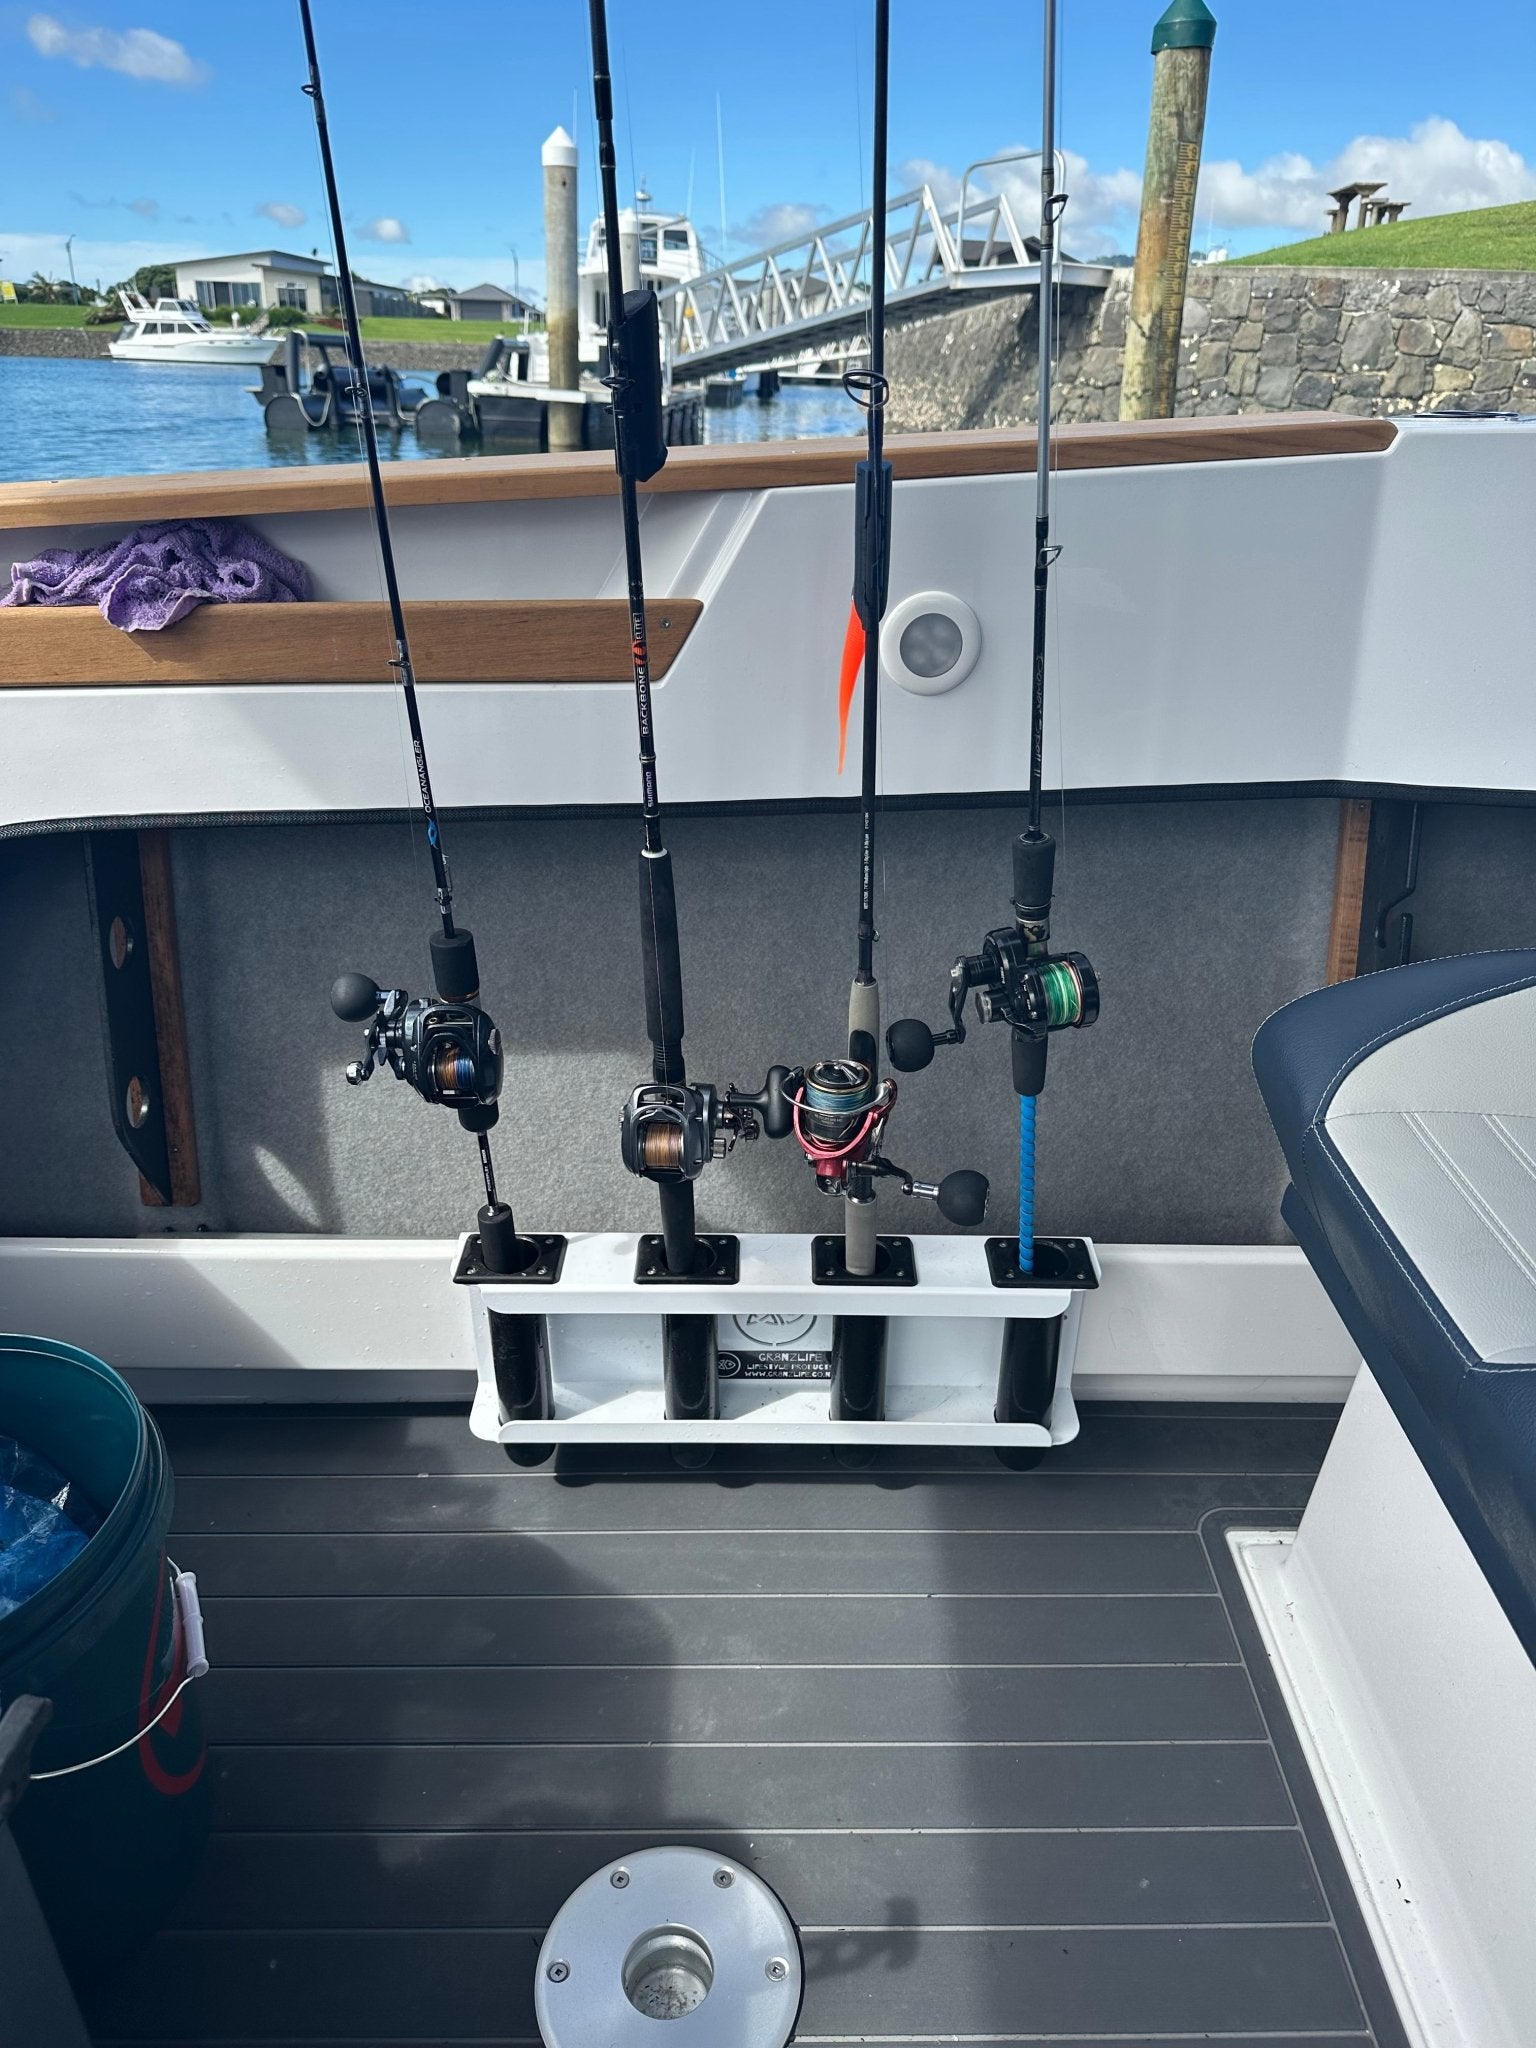 How many rod Holders are there in a boat?